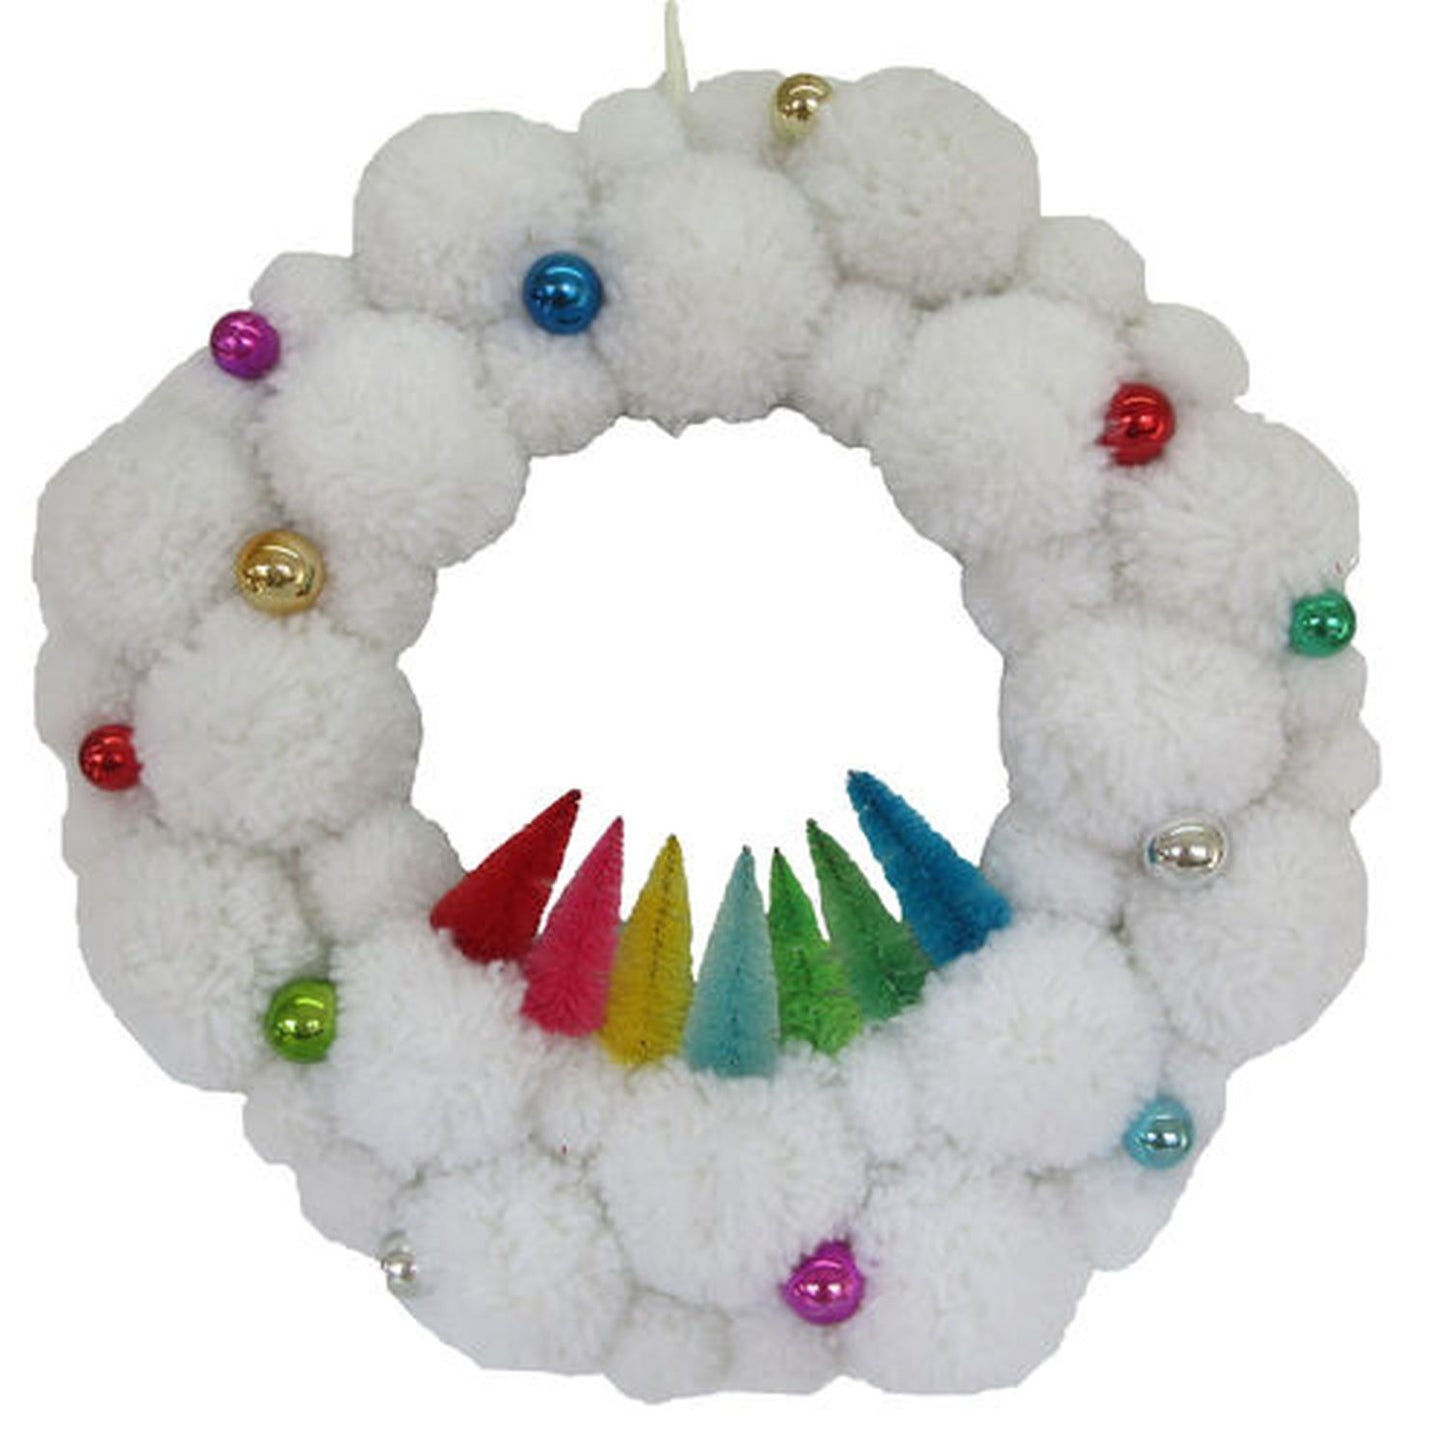 Christmas Carousel White Pom Pom Wreath With Color Trees / Balls